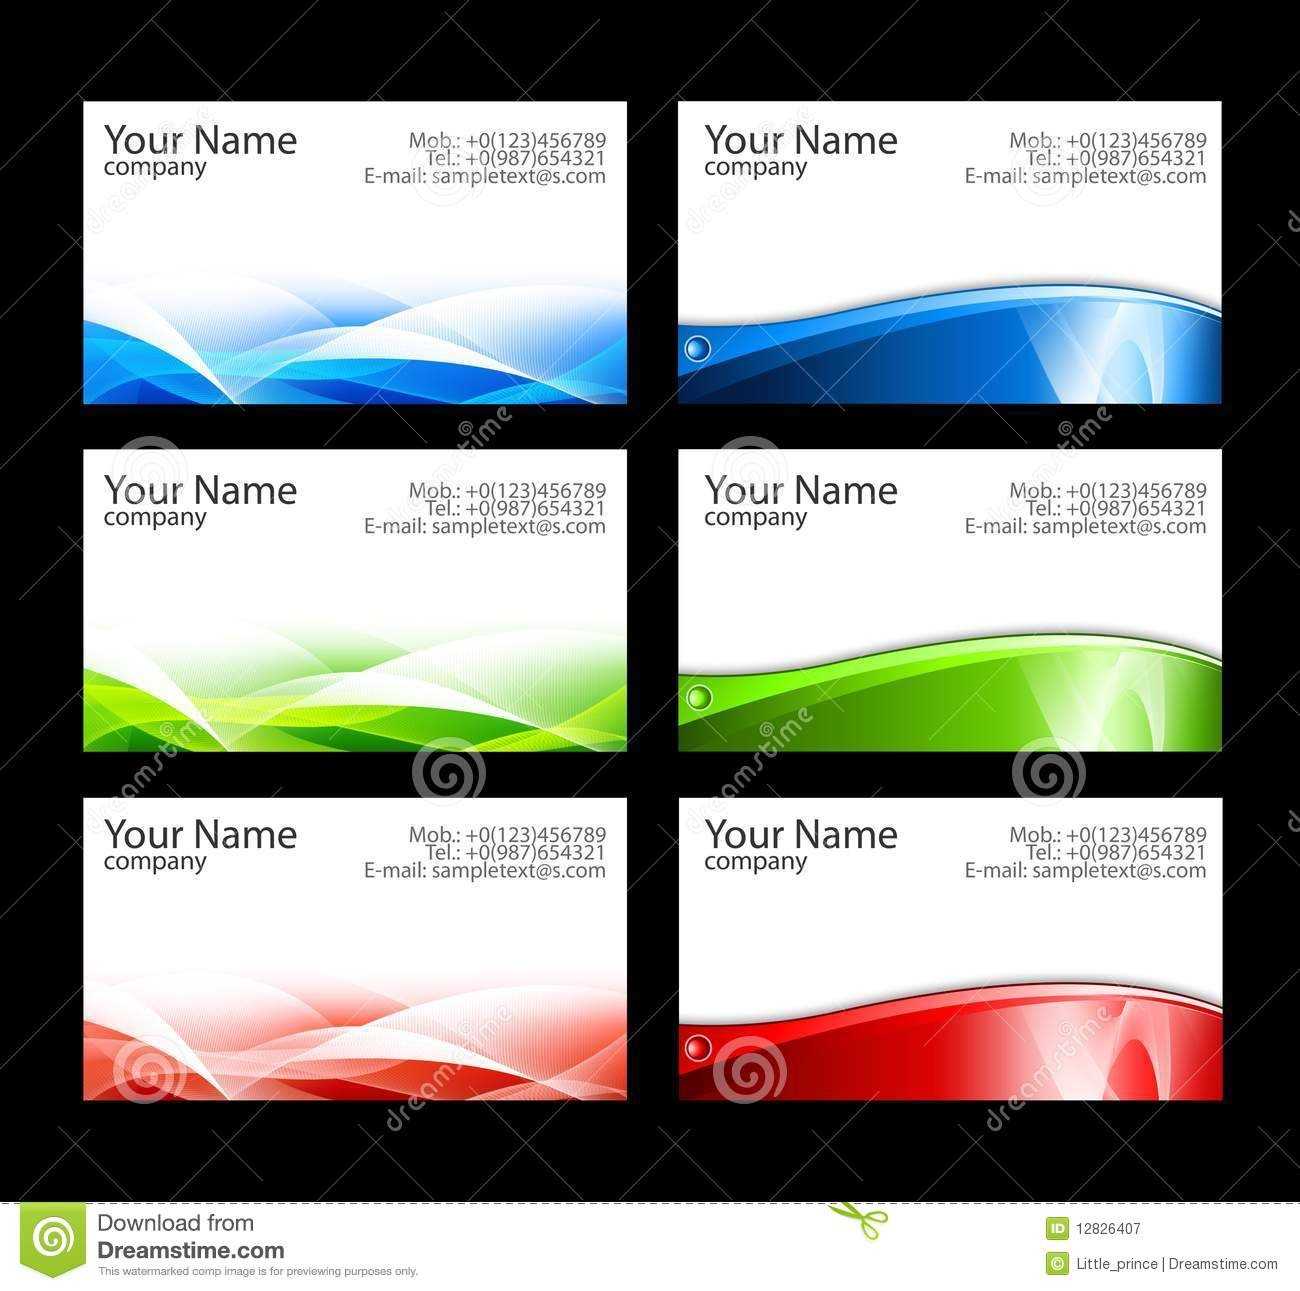 15 Free Avery Business Card Templates Images – Free Business With Free Complimentary Card Templates